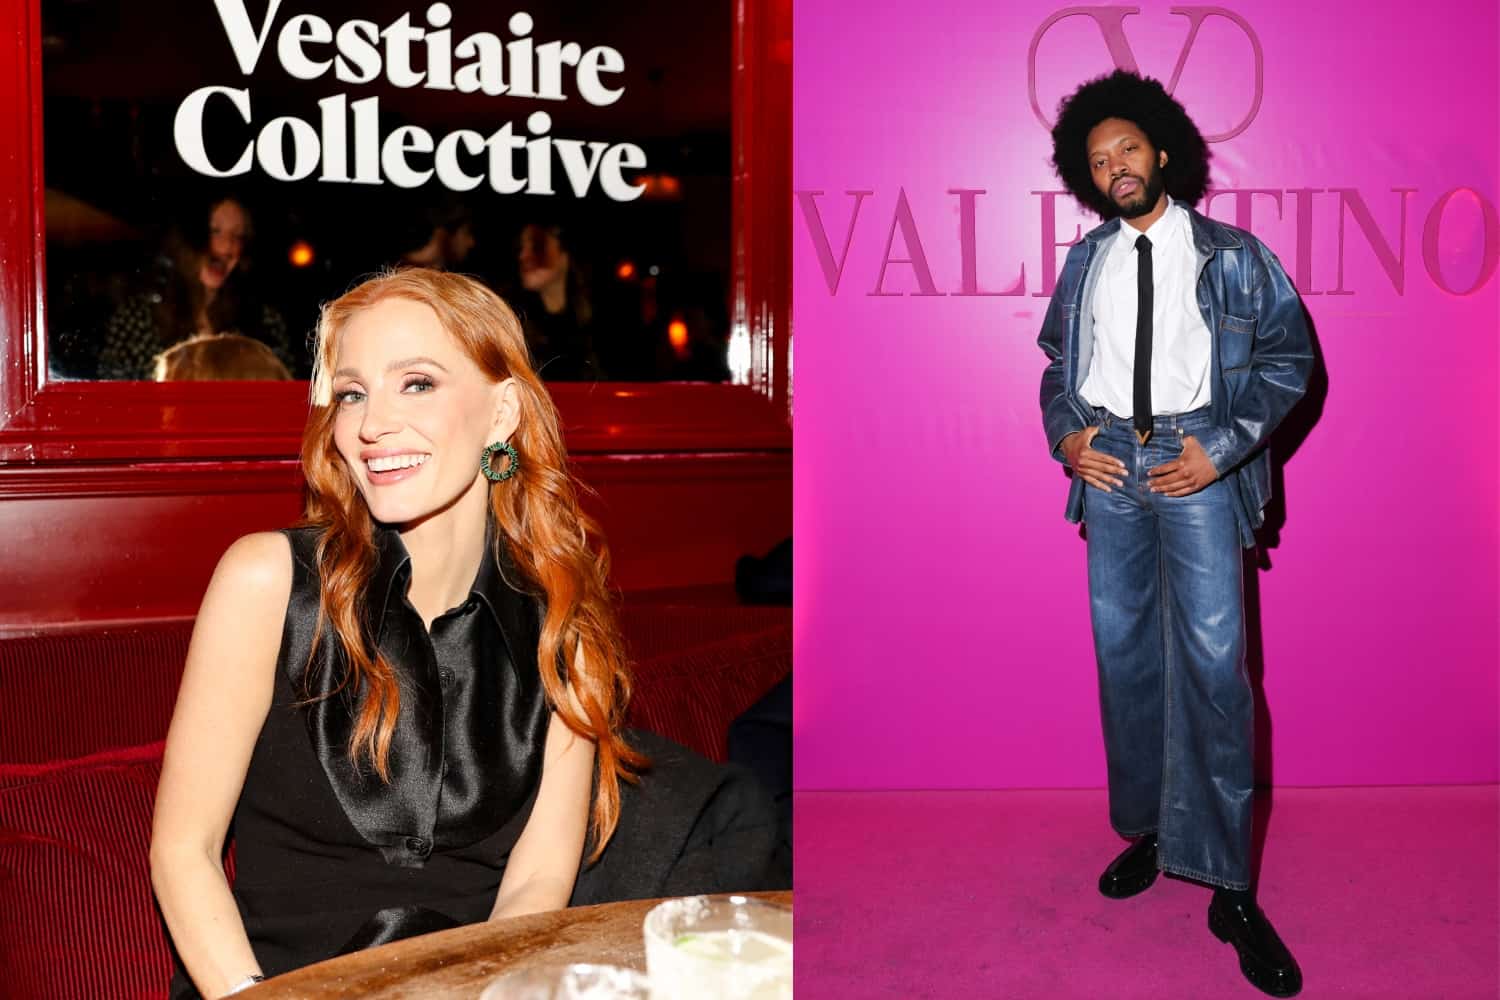 Valentino Paints Soho Pink, A Night Out At The Nines With Vestiaire Collective, Jessica Chastain, & Elizabeth Stewart